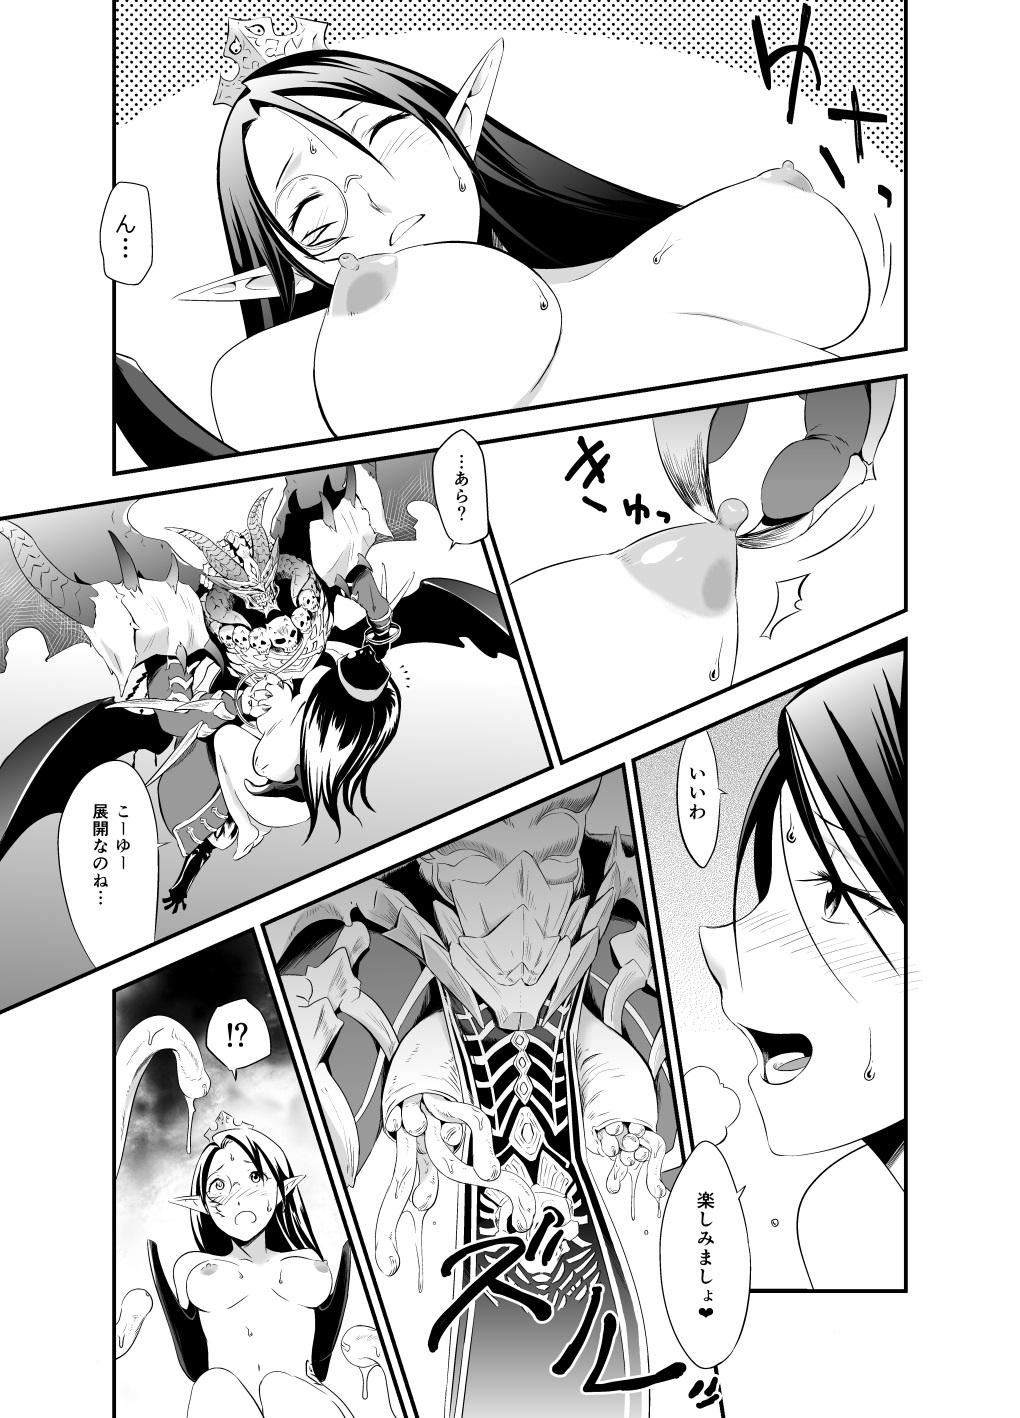 Cum Swallow 3rd Ride - Cardfight vanguard Desperate - Page 9